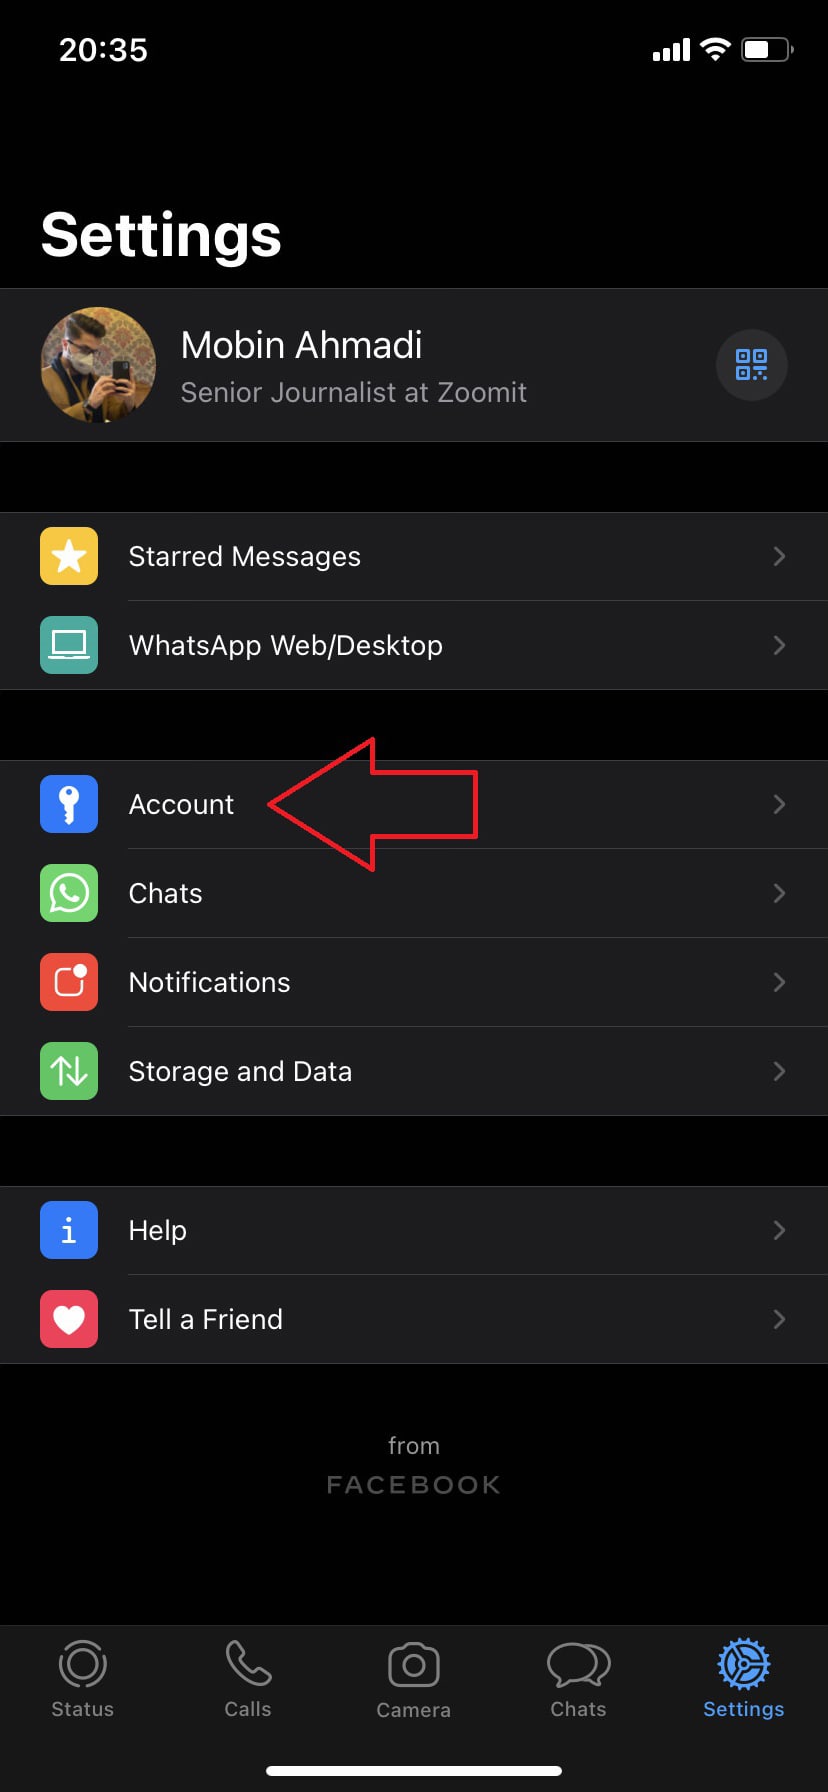 The second step is to delete the WhatsApp account on iOS